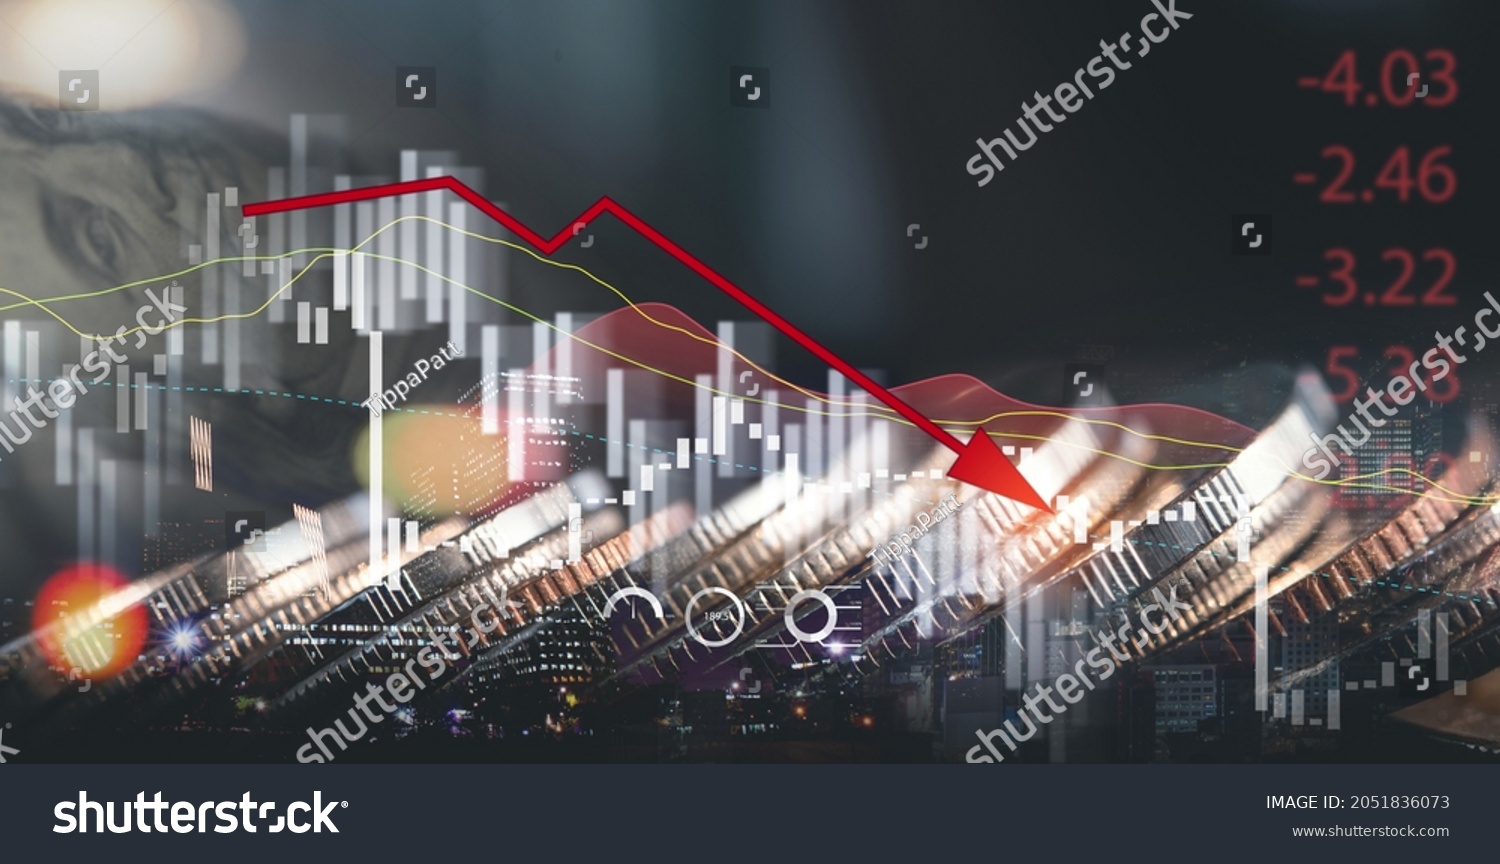 Economic crisis, financial background. Double exposure of Coins and US dollars bank note currency with financial graph chart falling due to global economic recession, stock market crash, inflation #2051836073